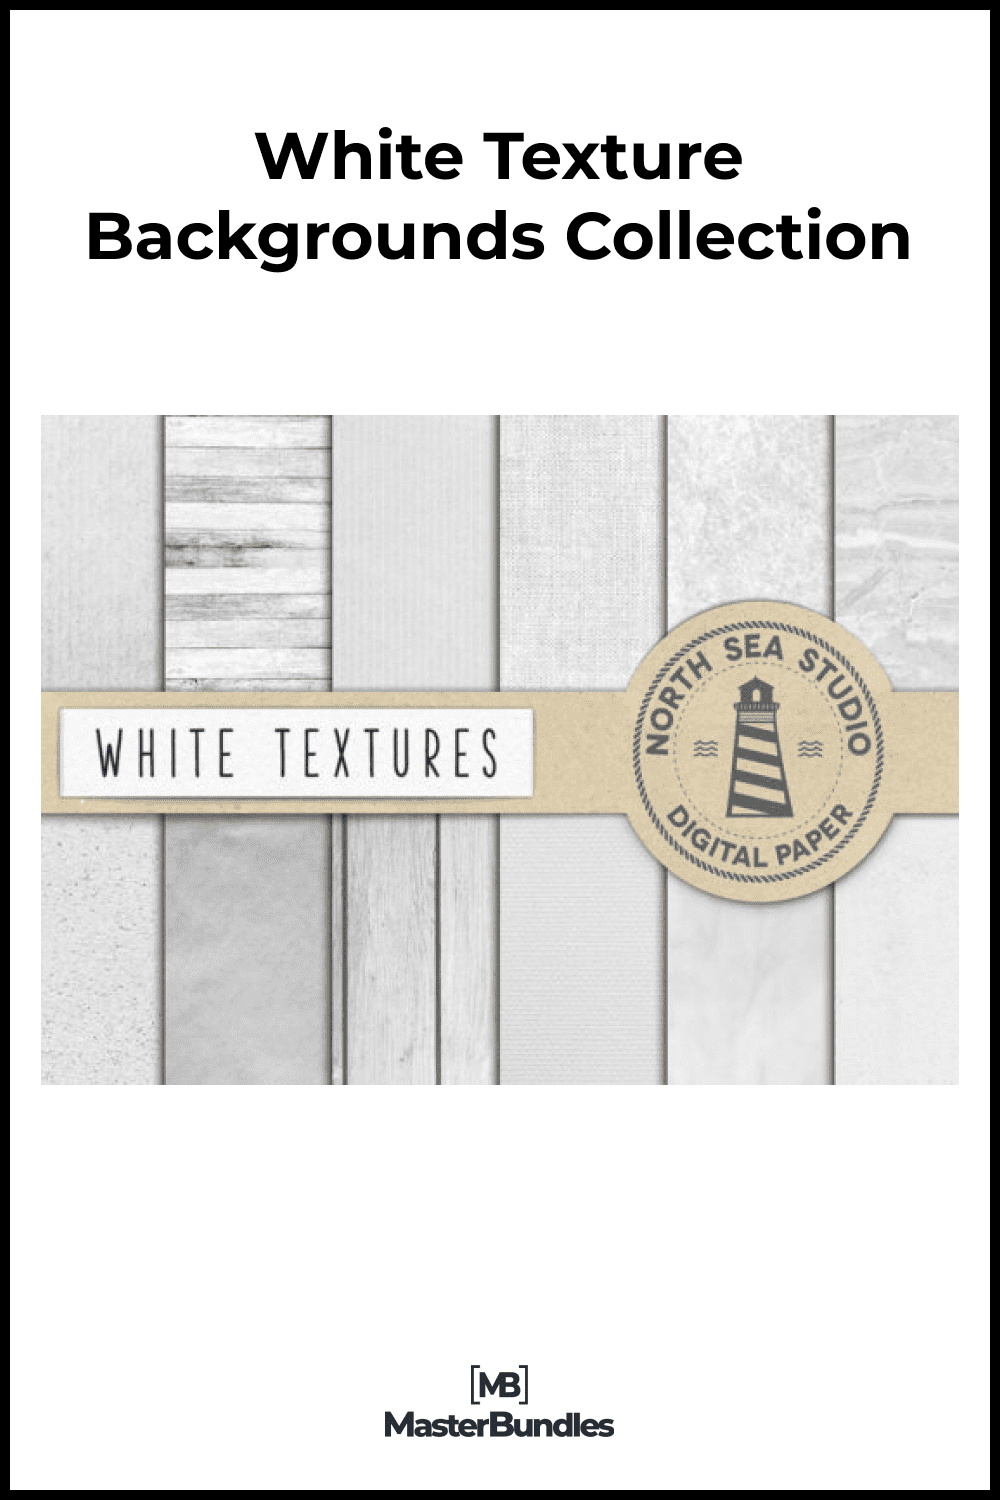 White Texture Backgrounds Collection.